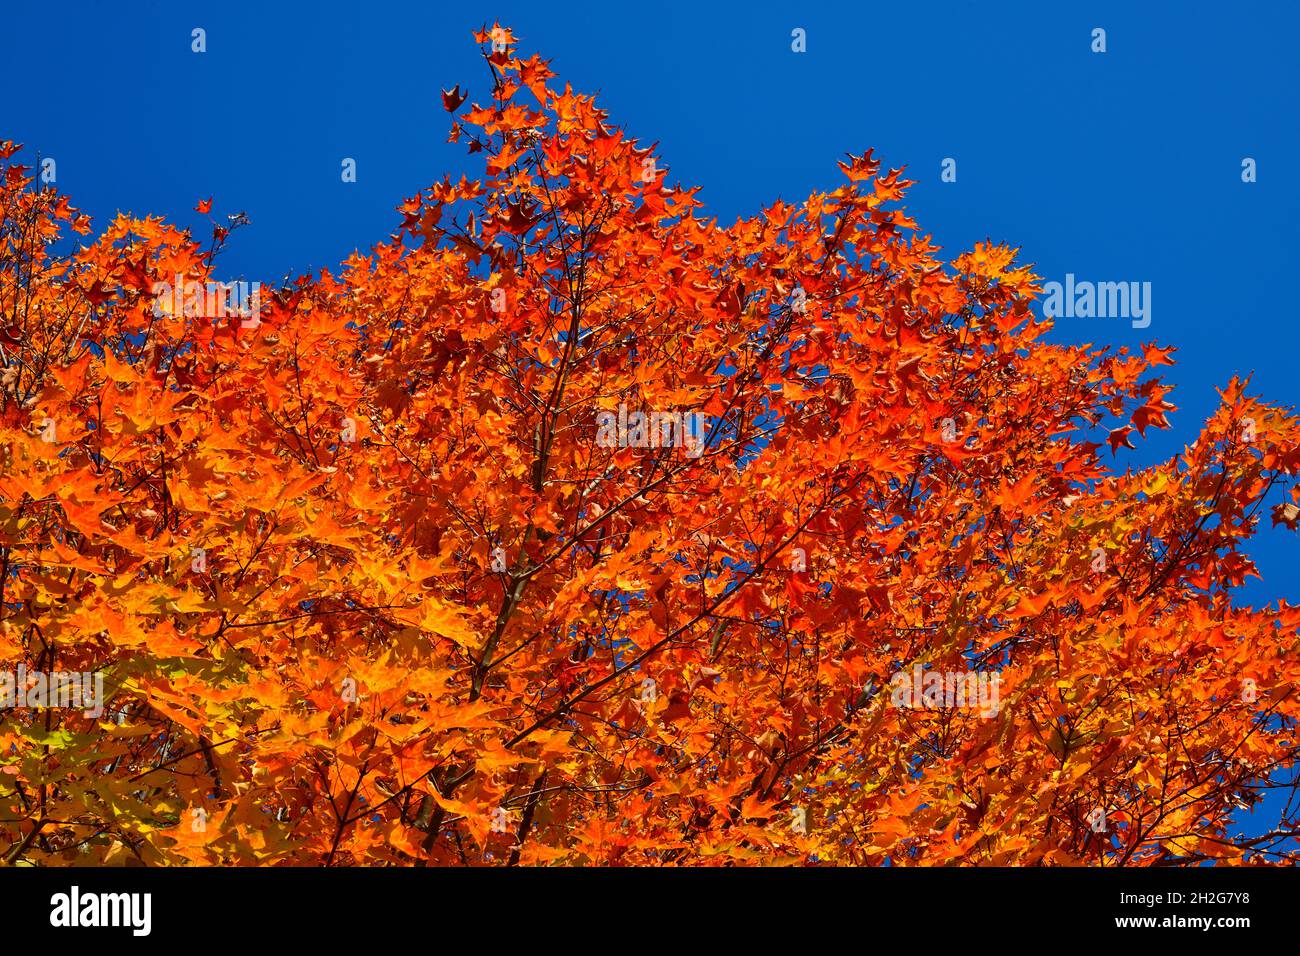 A horizontal image of red maple leaves against a blue sky in rural New Brunswick Canada Stock Photo